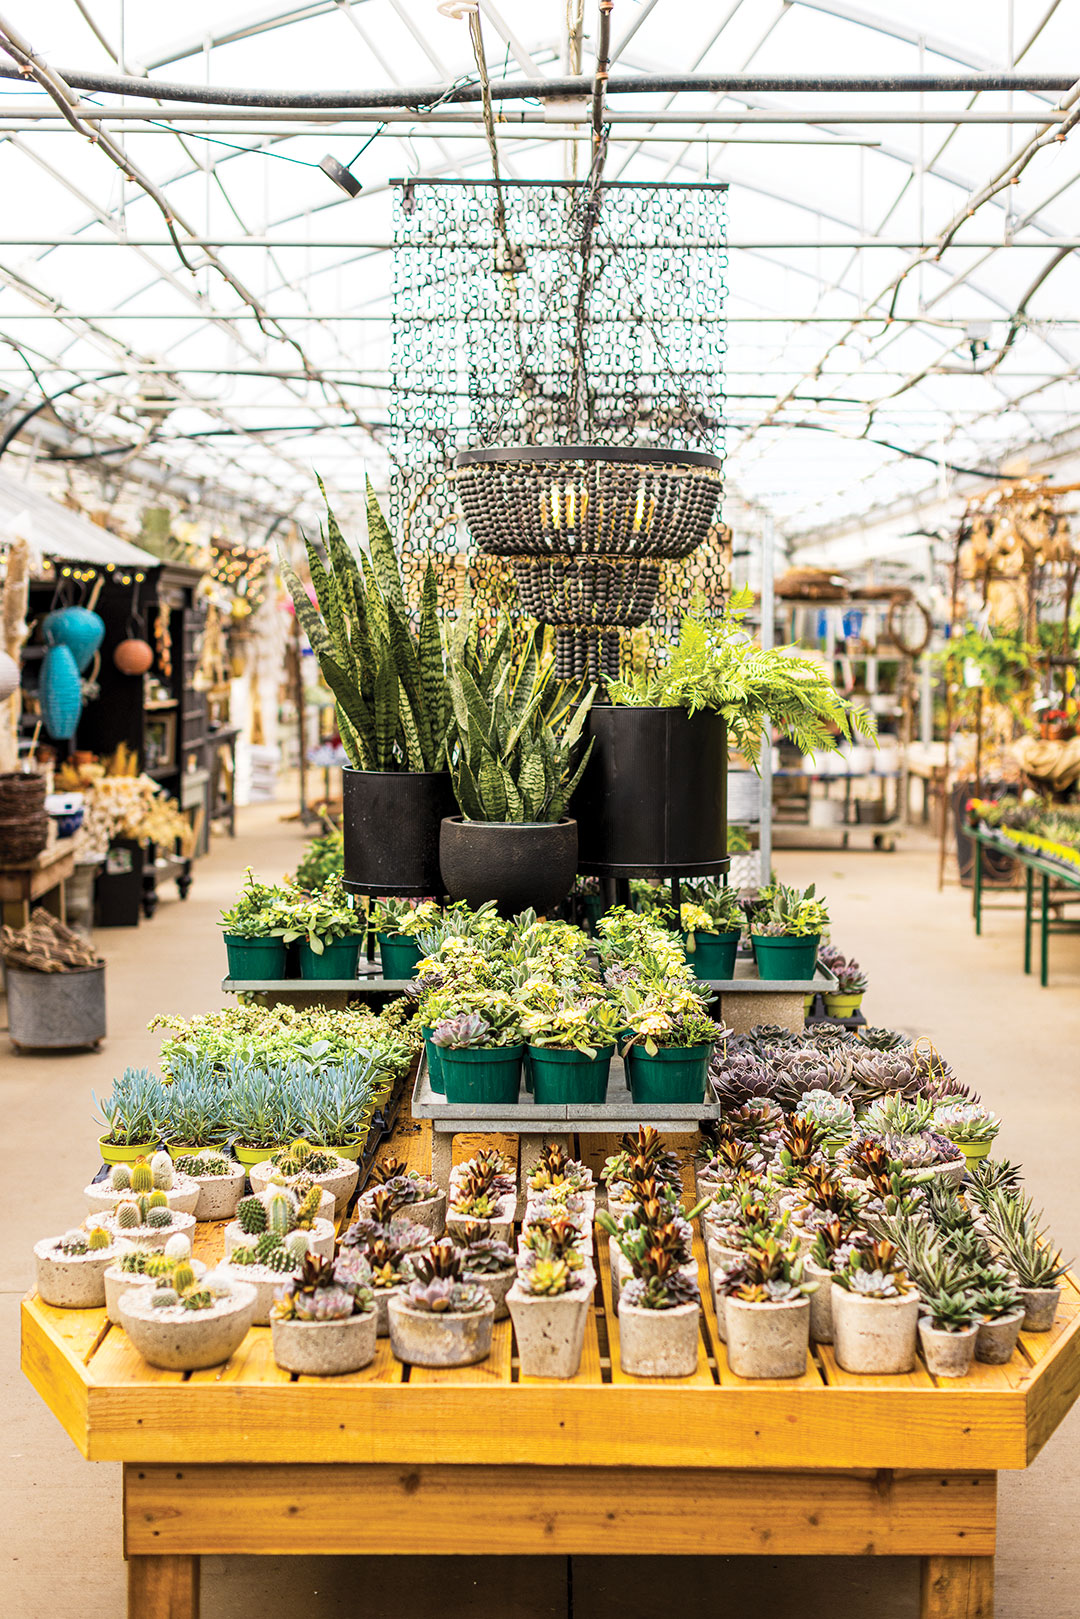 Home and garden inspiration abounds at Sailer’s Greenhouse in Prior Lake.